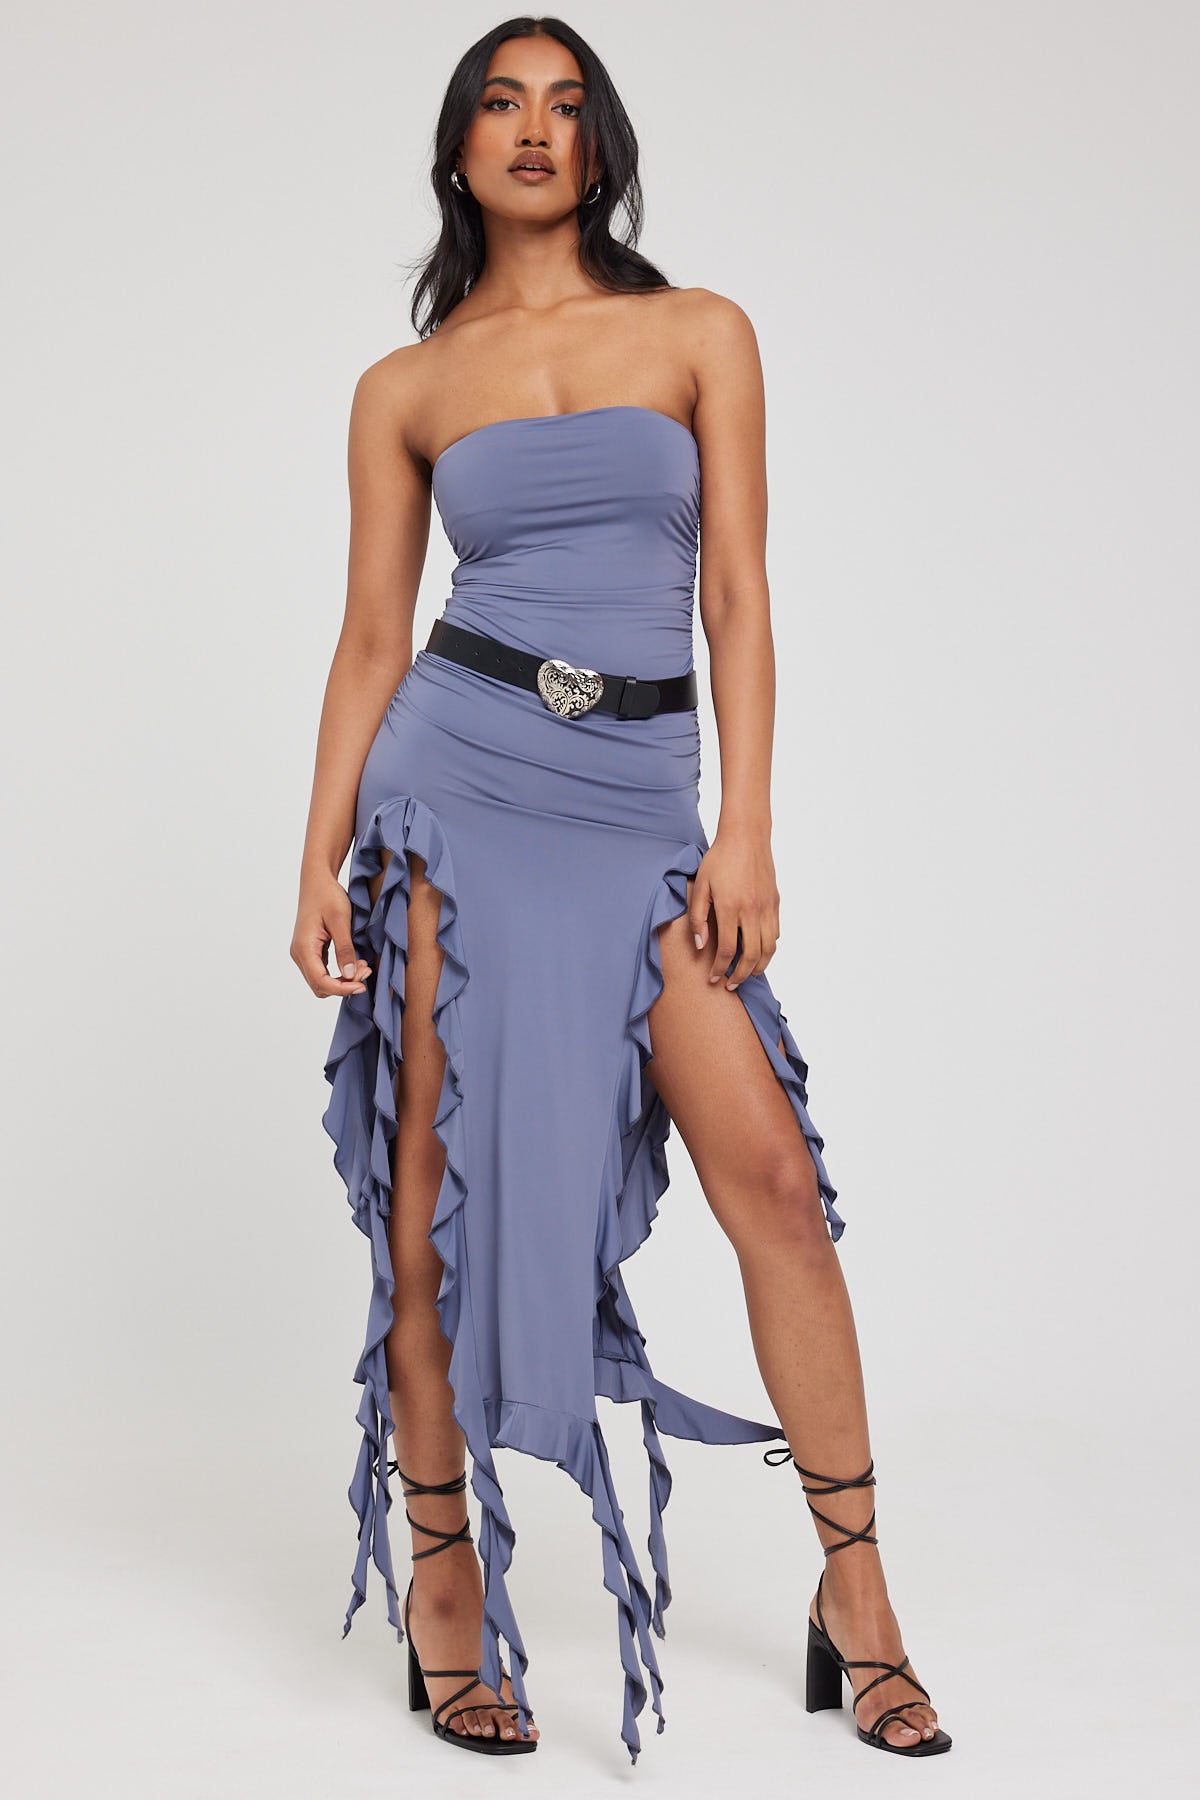 Lioness Rendezvous Strapless Dress Slate